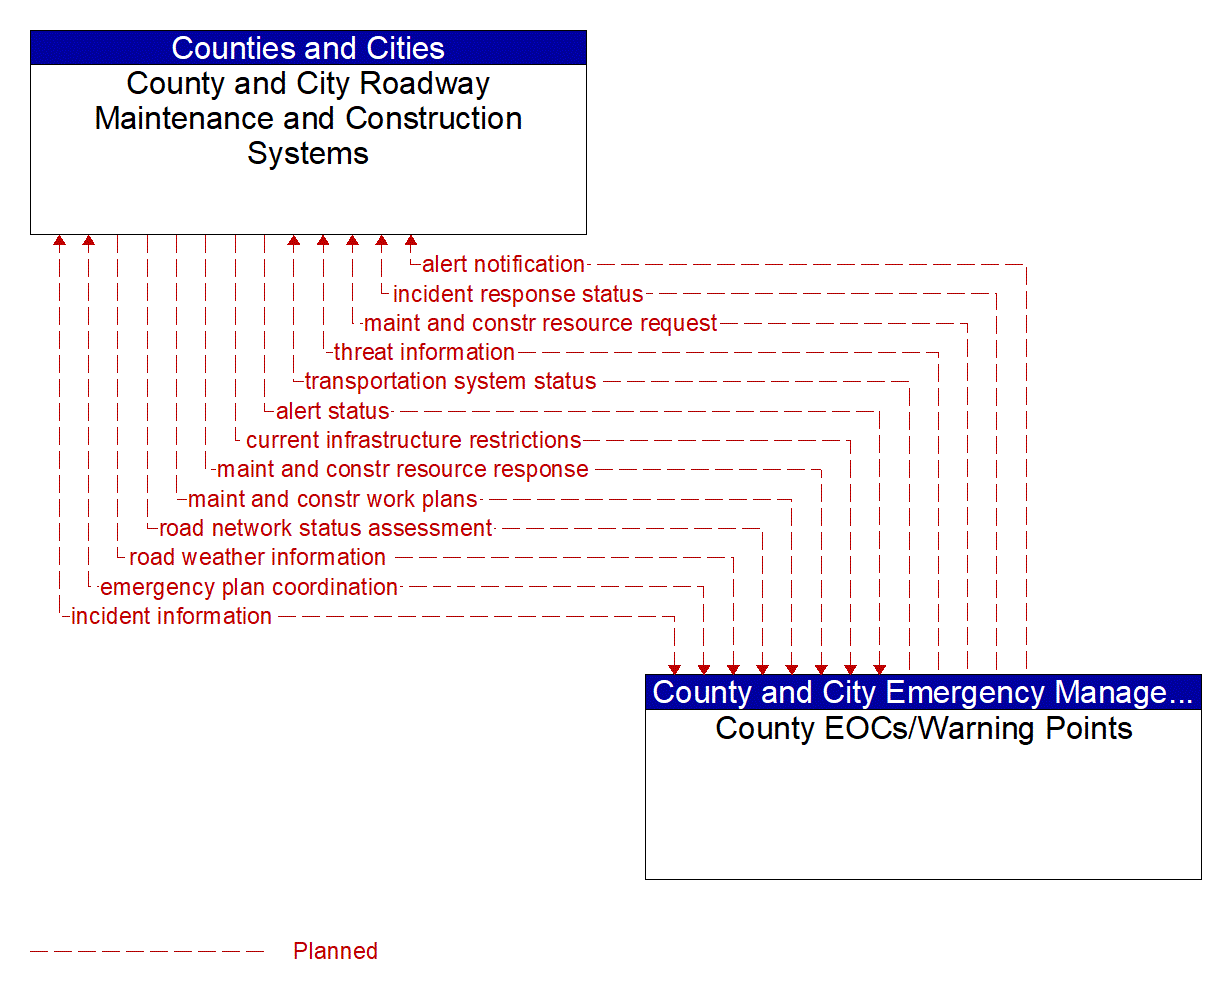 Architecture Flow Diagram: County EOCs/Warning Points <--> County and City Roadway Maintenance and Construction Systems